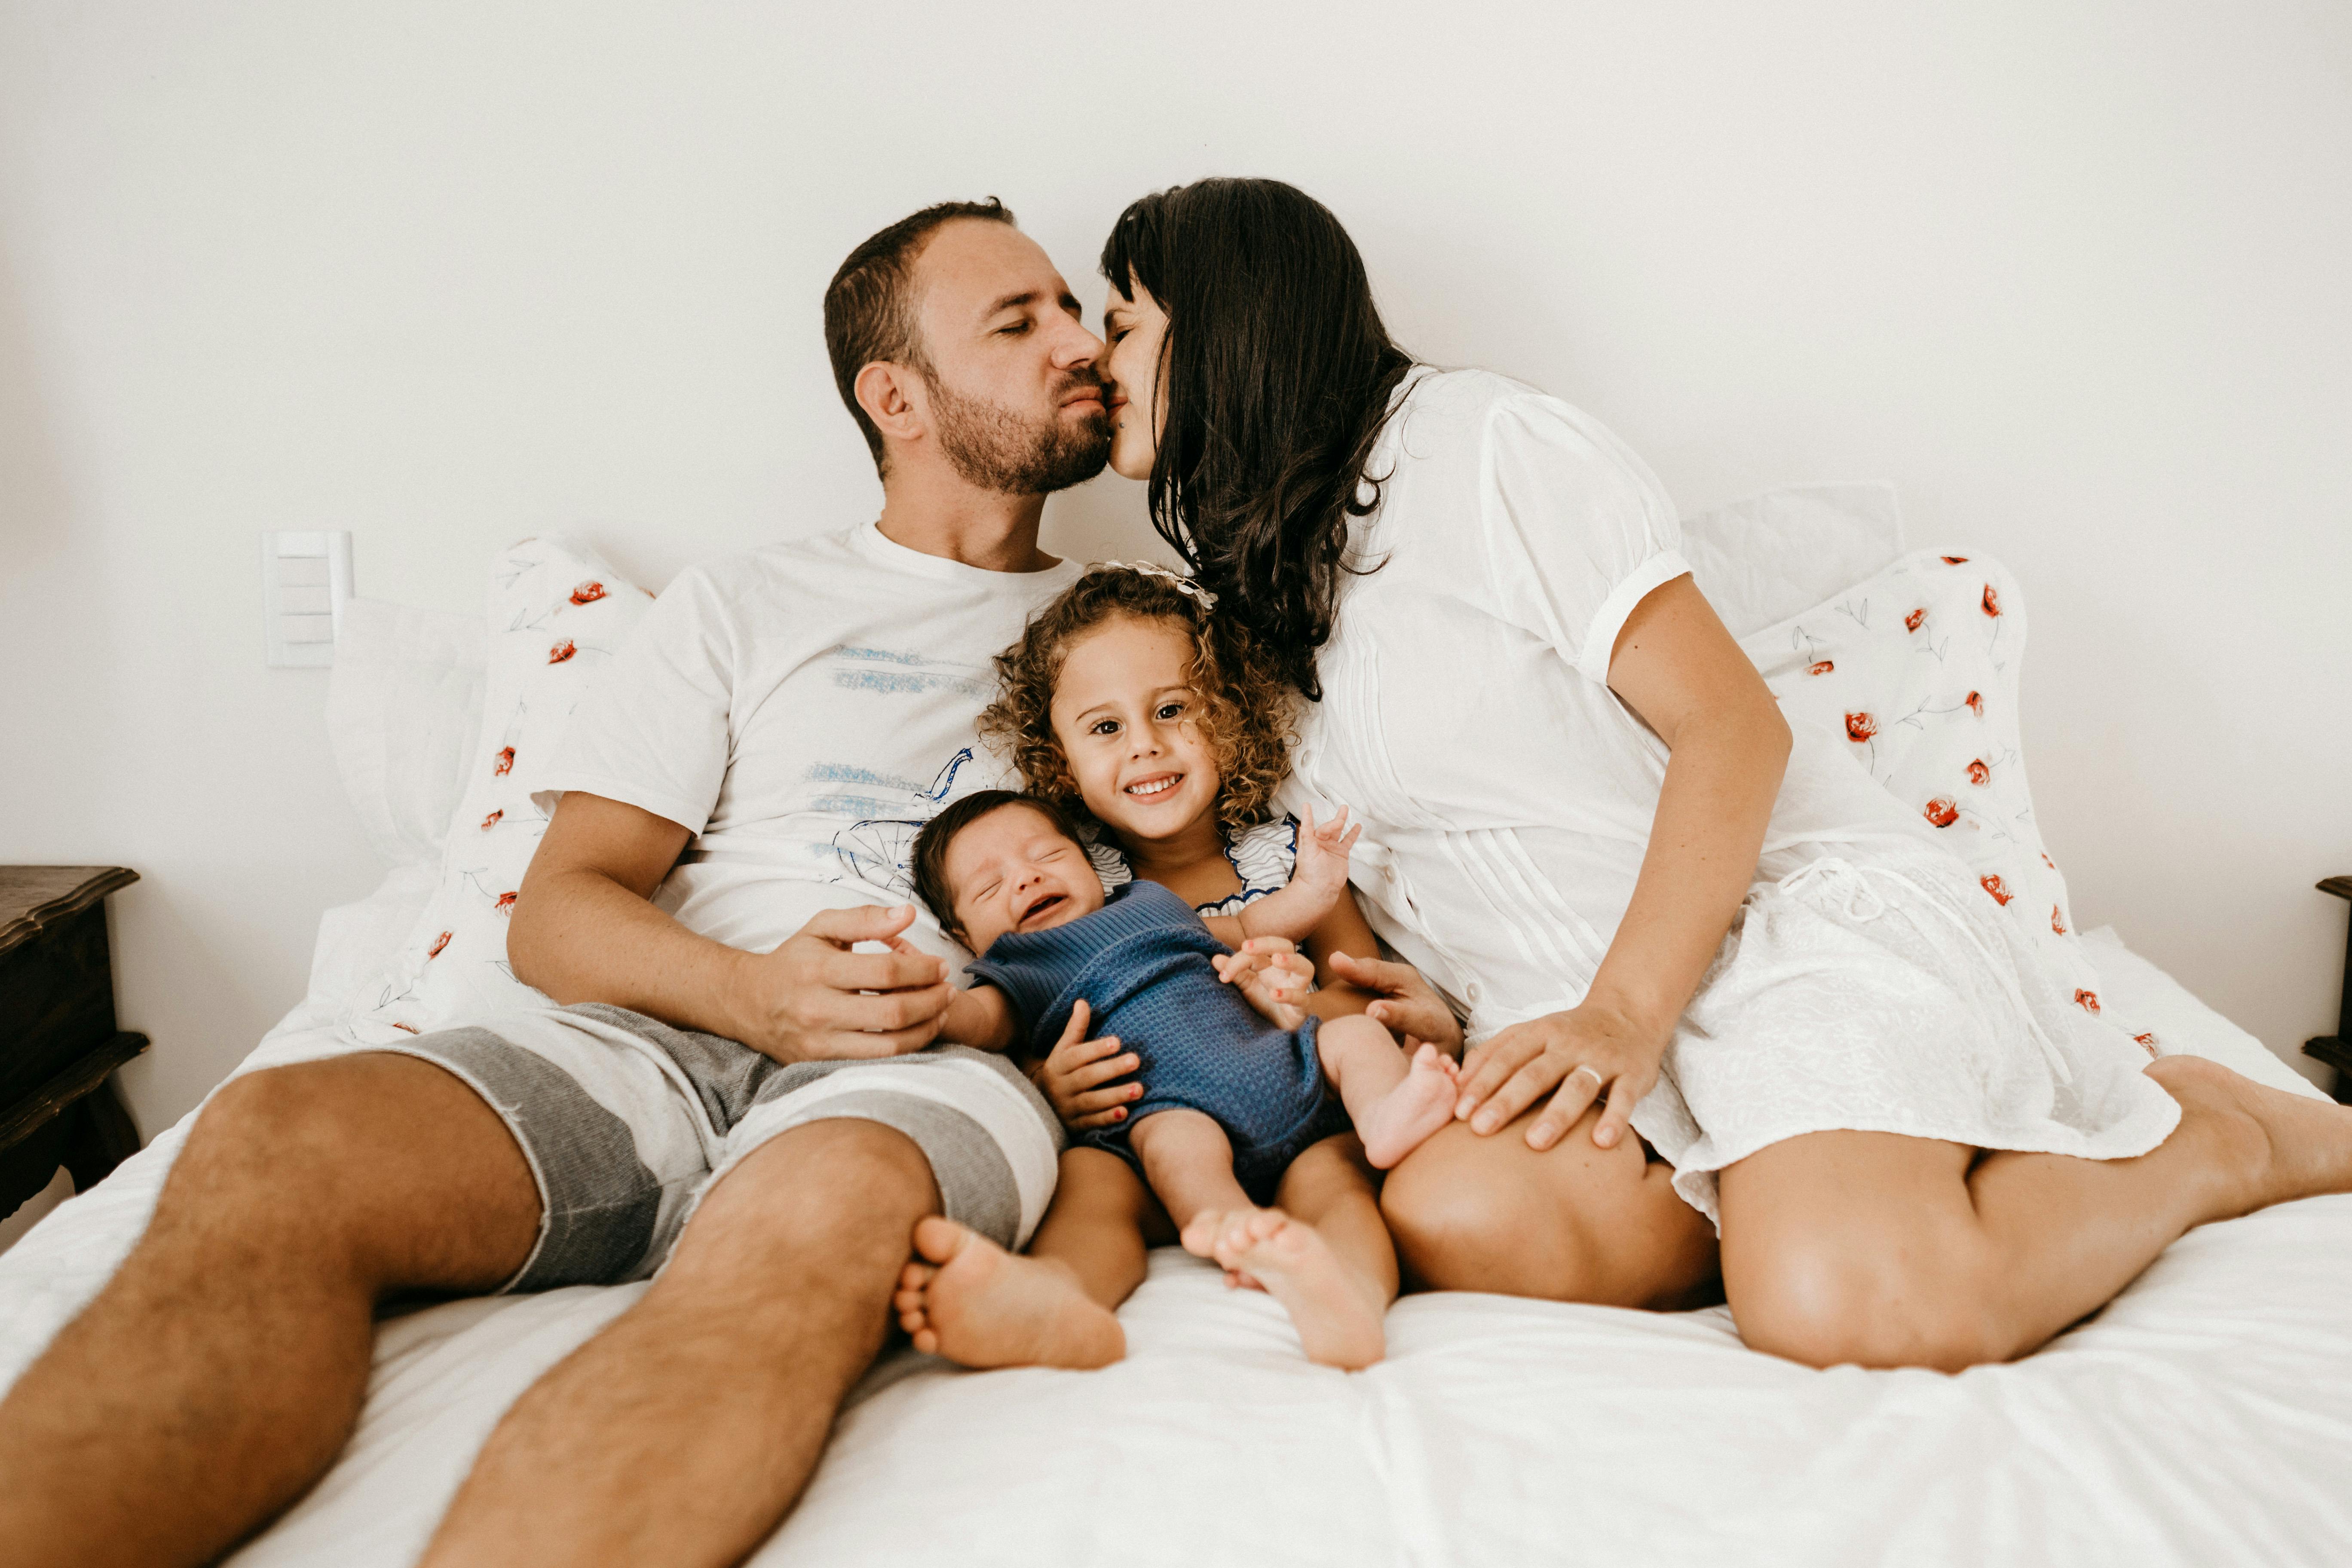 100,000+ Best Family Images · 100% Free Download · Pexels Stock Photos